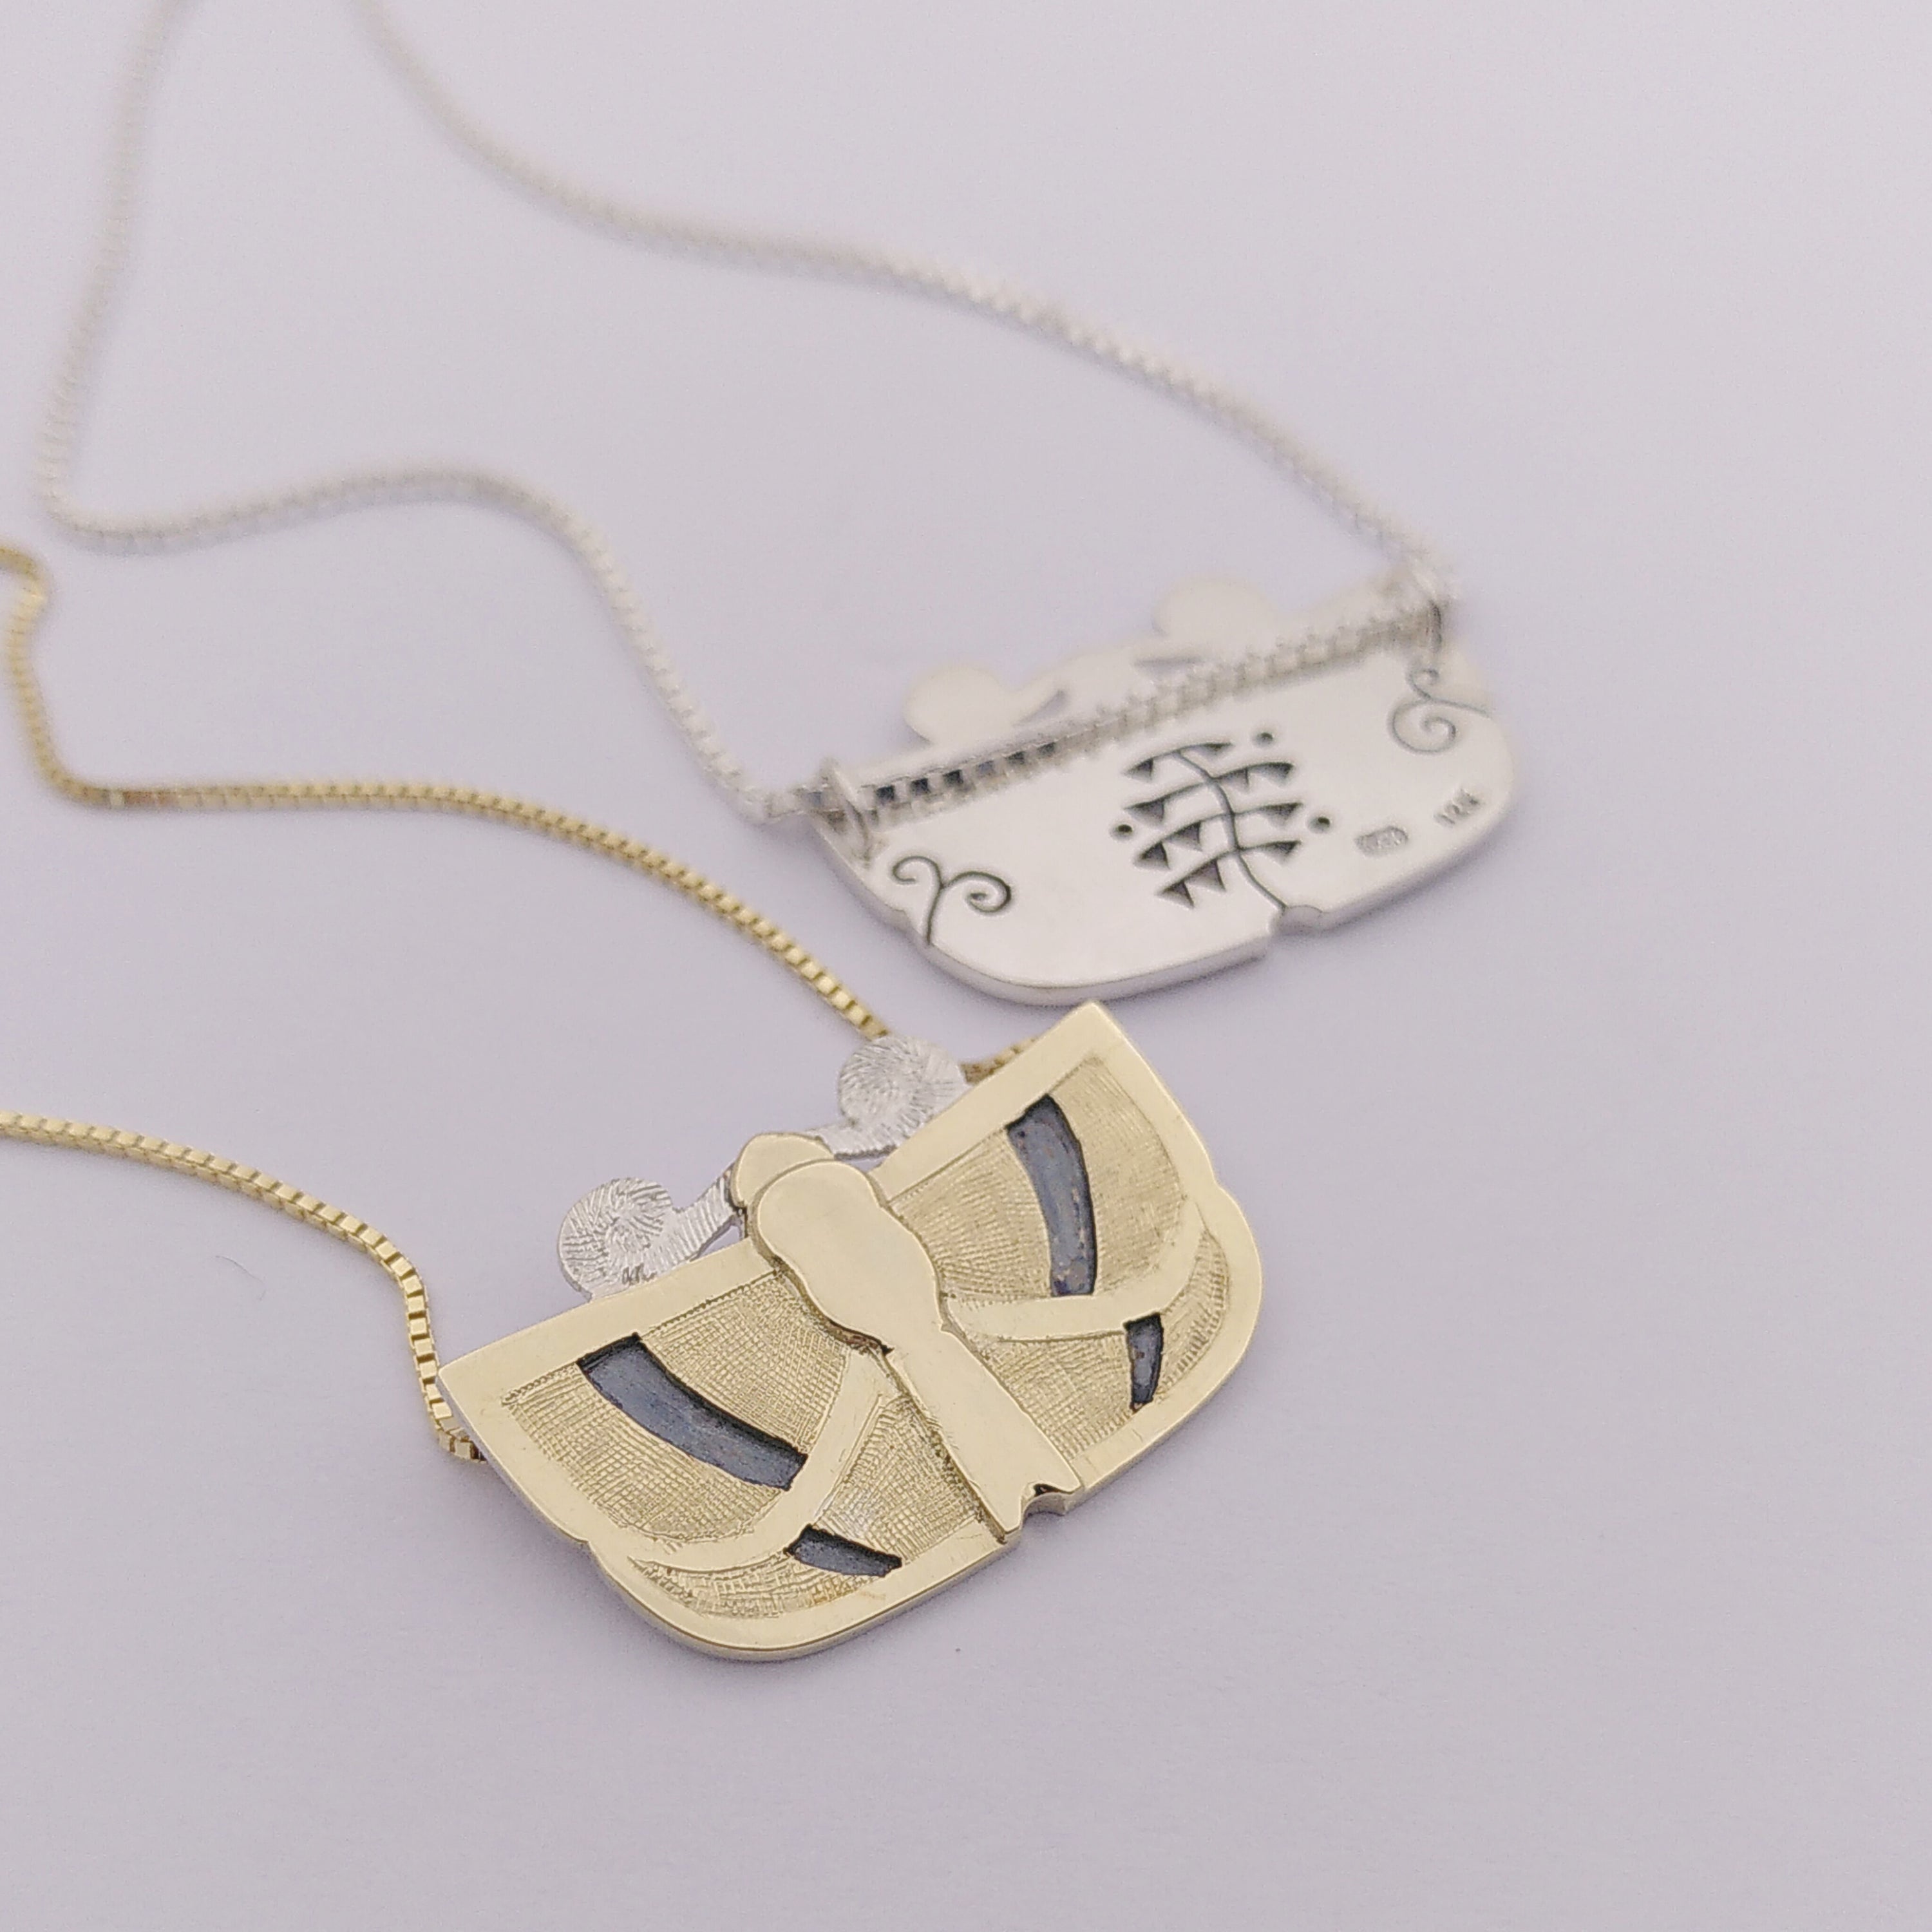 Two pendants in a butterfly shape, one in silver one in gold. Made by hand by Casez Jewellery.